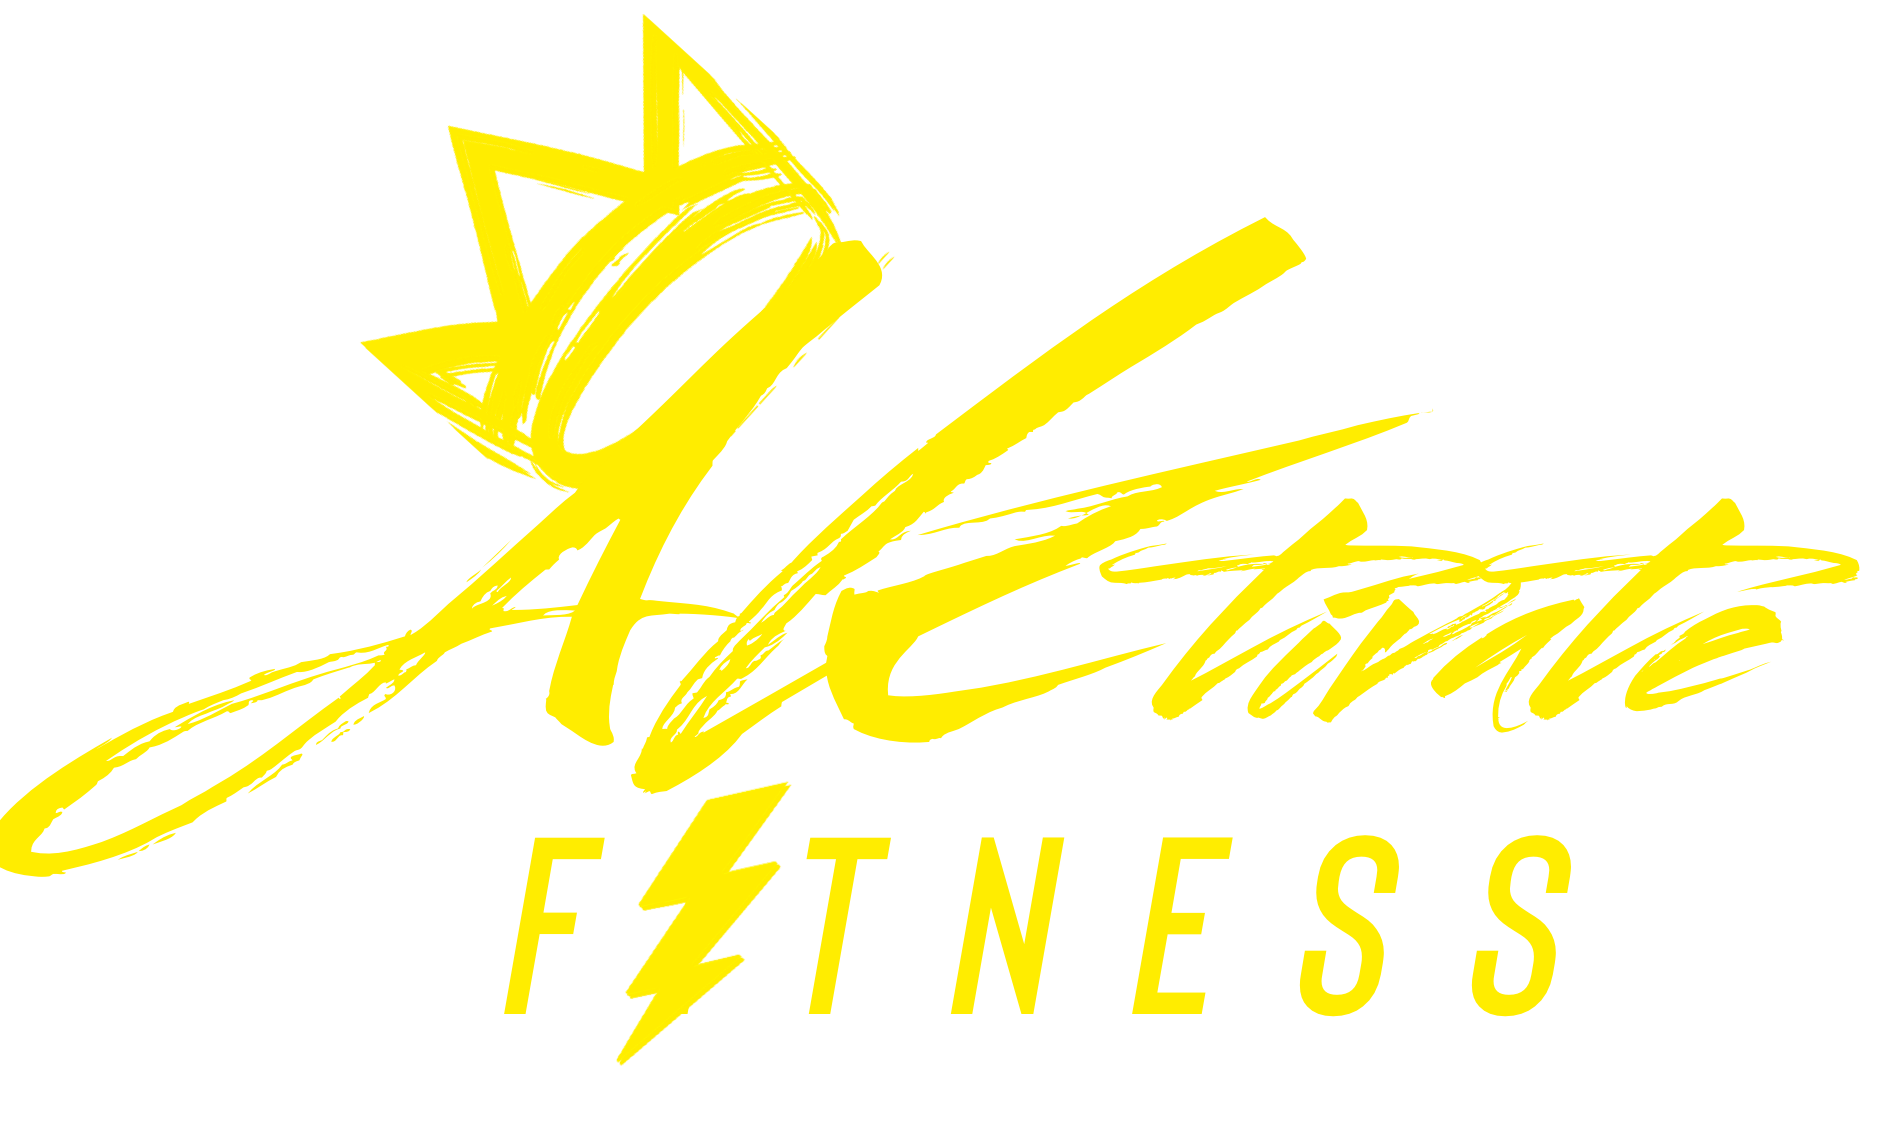 Best Boxing Gym in Cary FIRST CLASS FREE - AKtivate Fitness